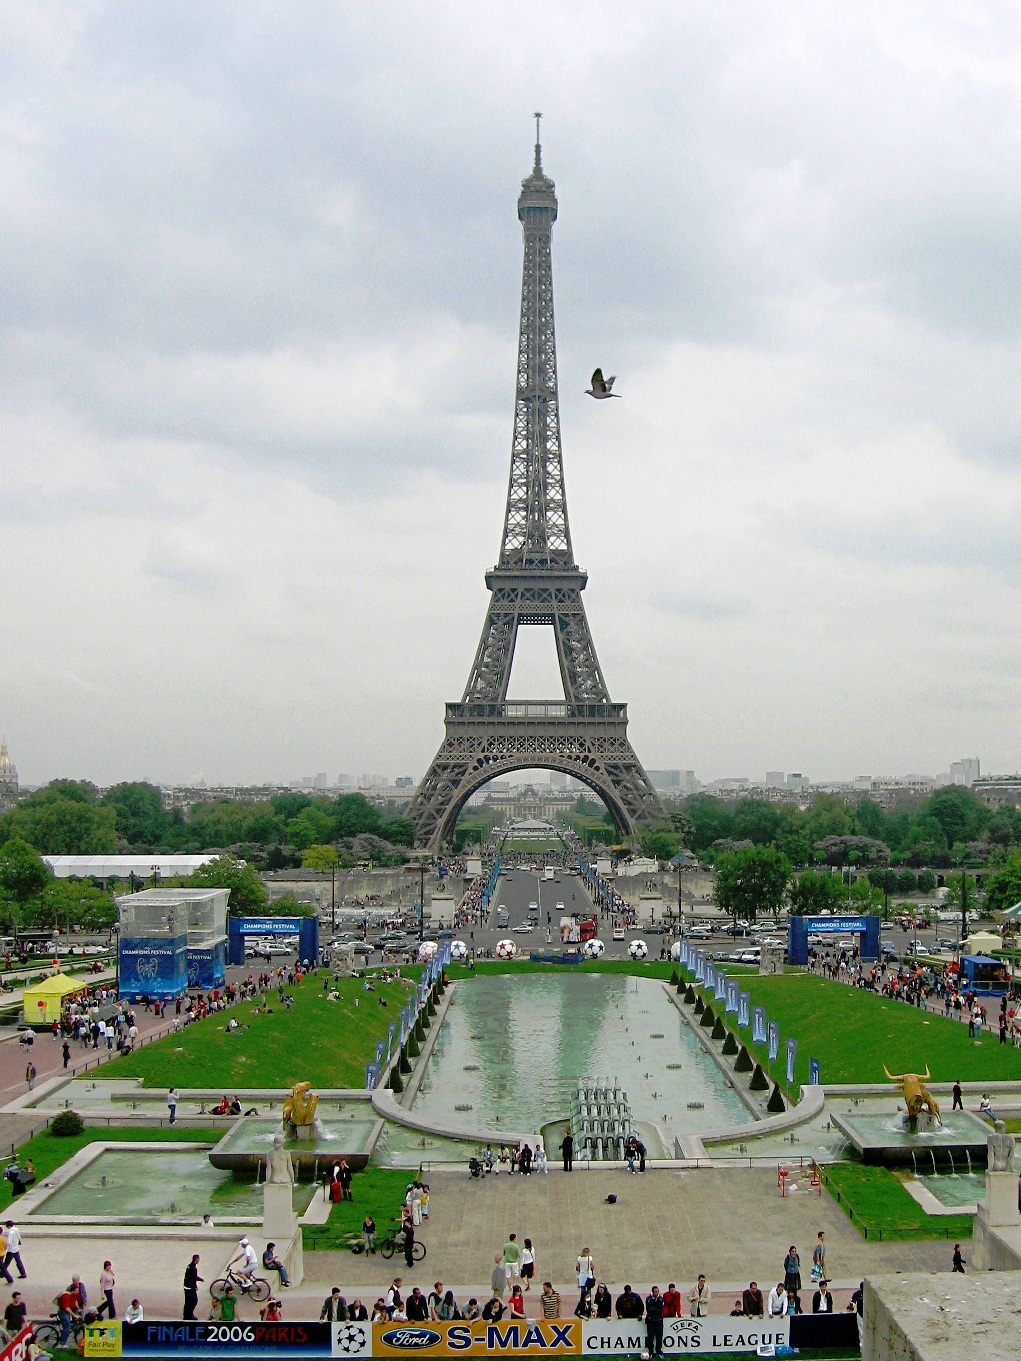 The Eiffel Tower - superb attraction